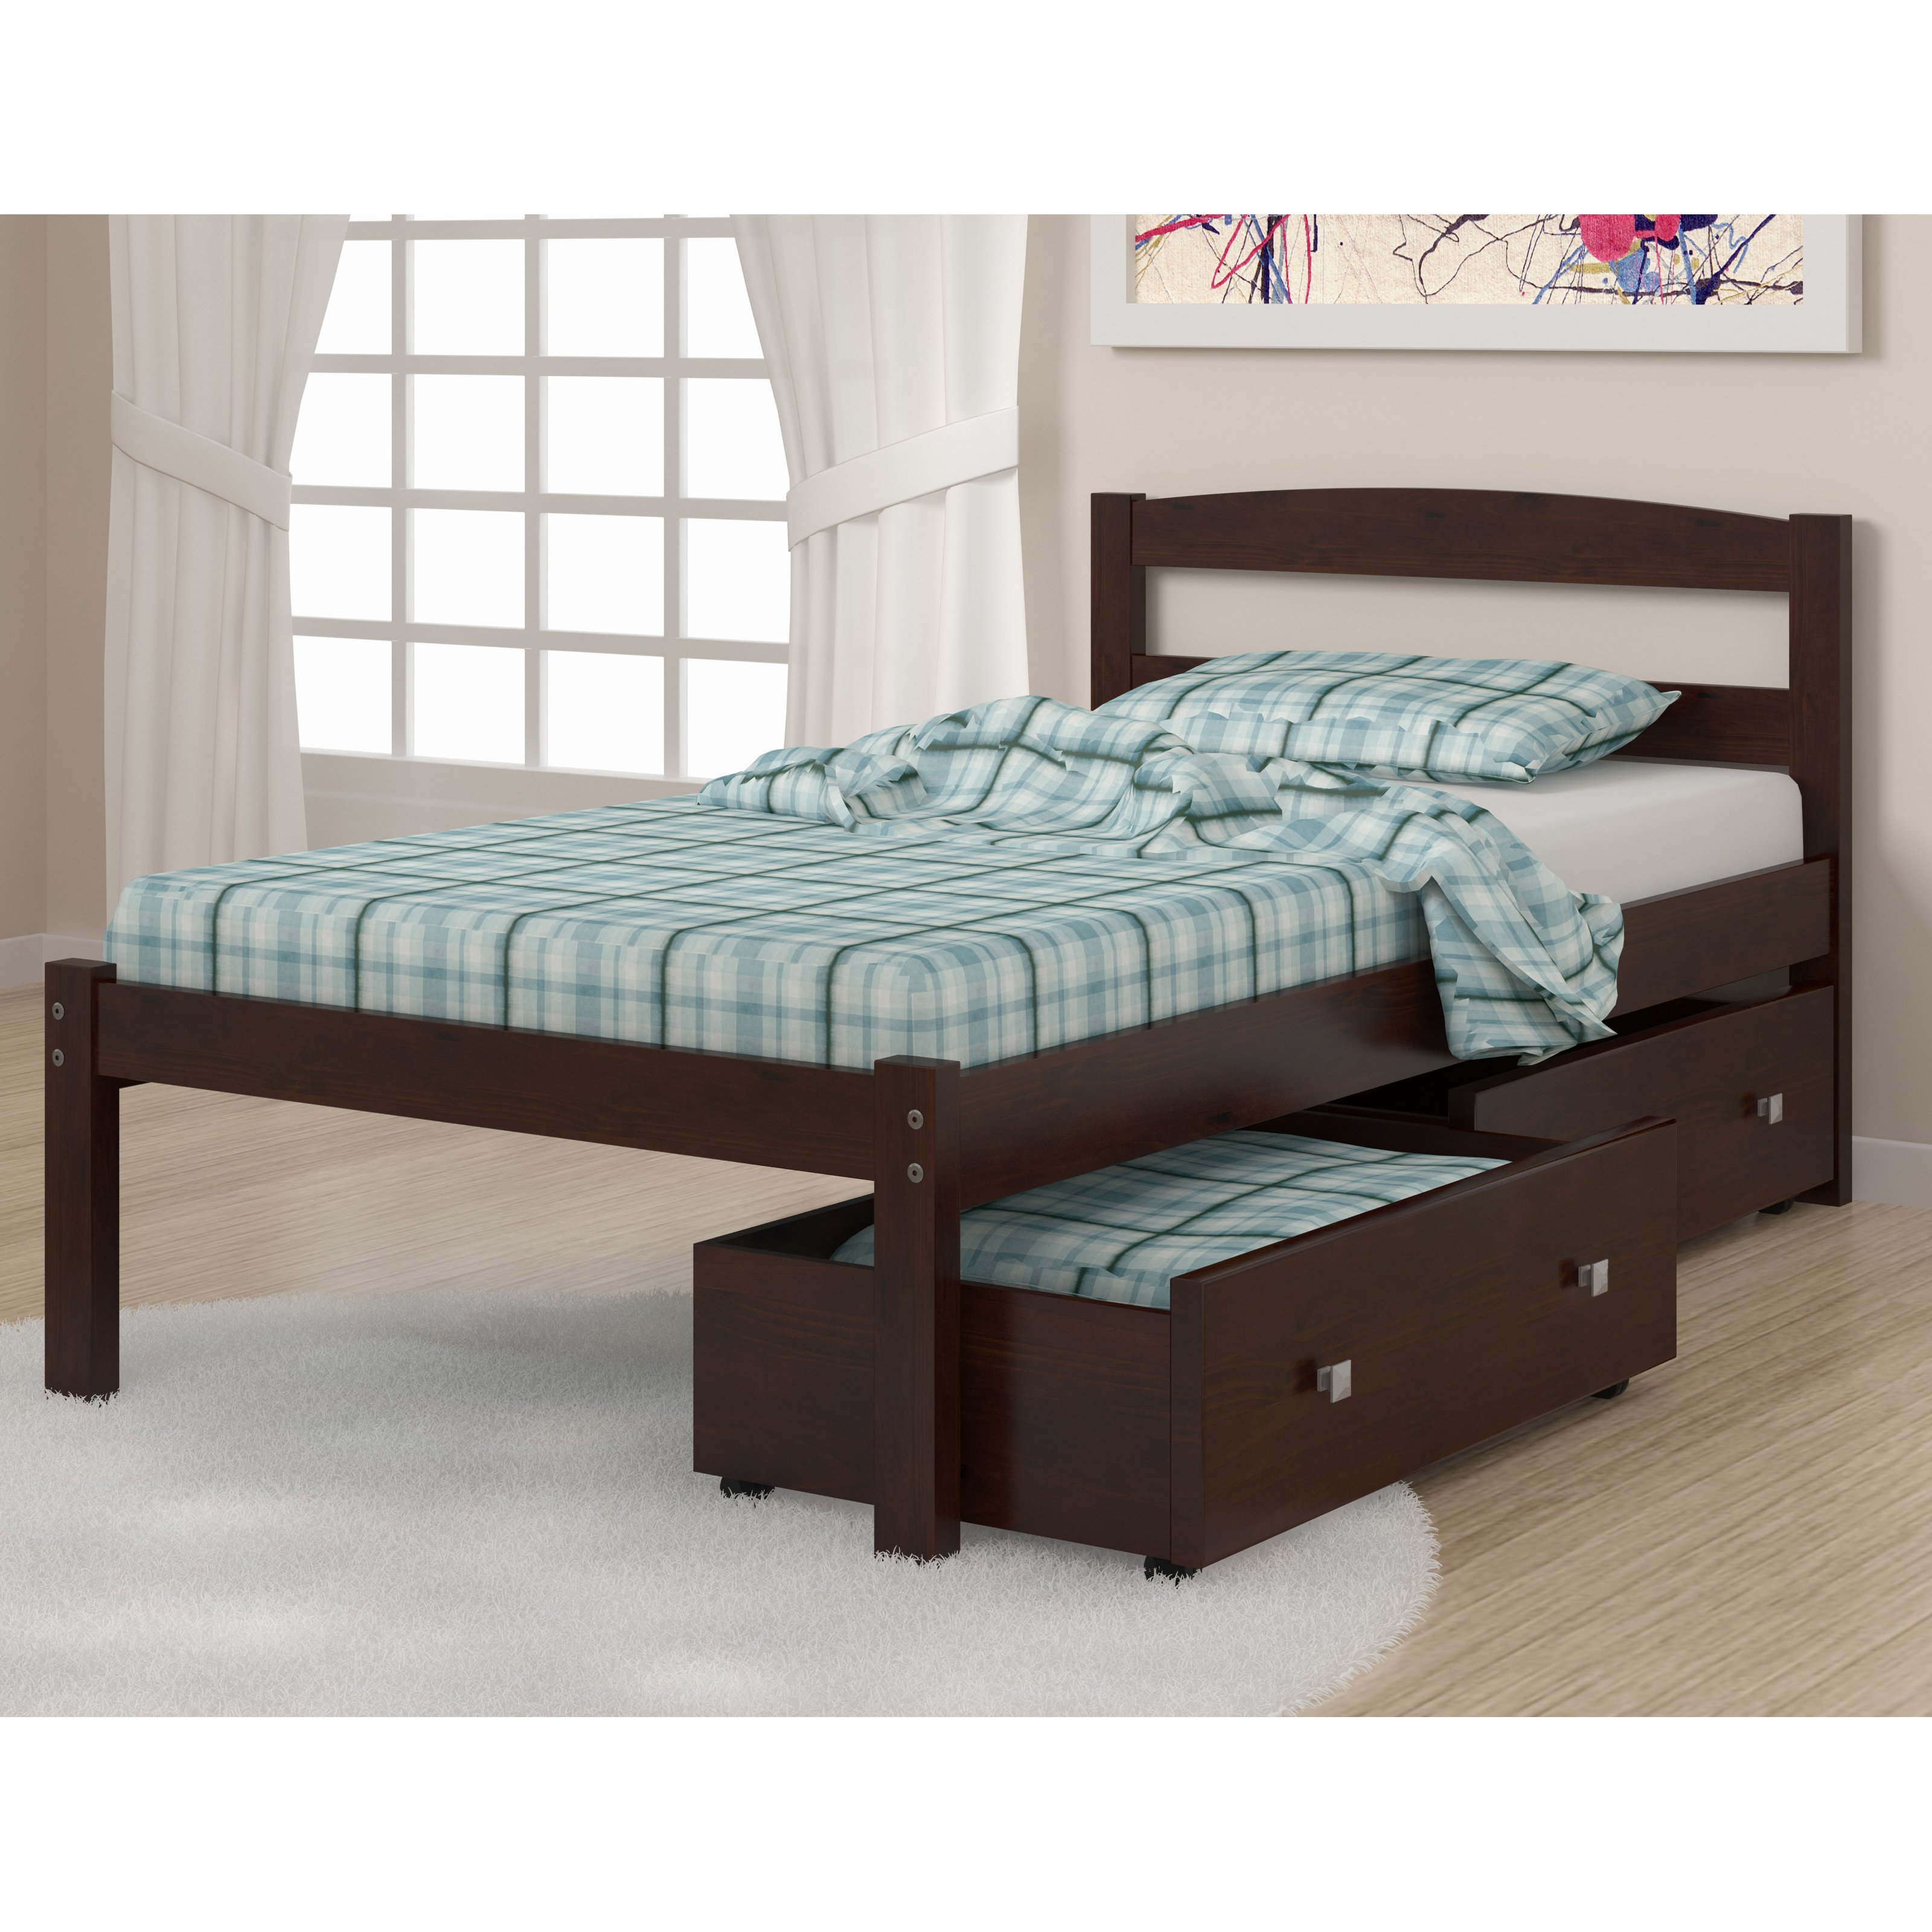 Donco Kids Econo Panel Bed - image 1 of 11